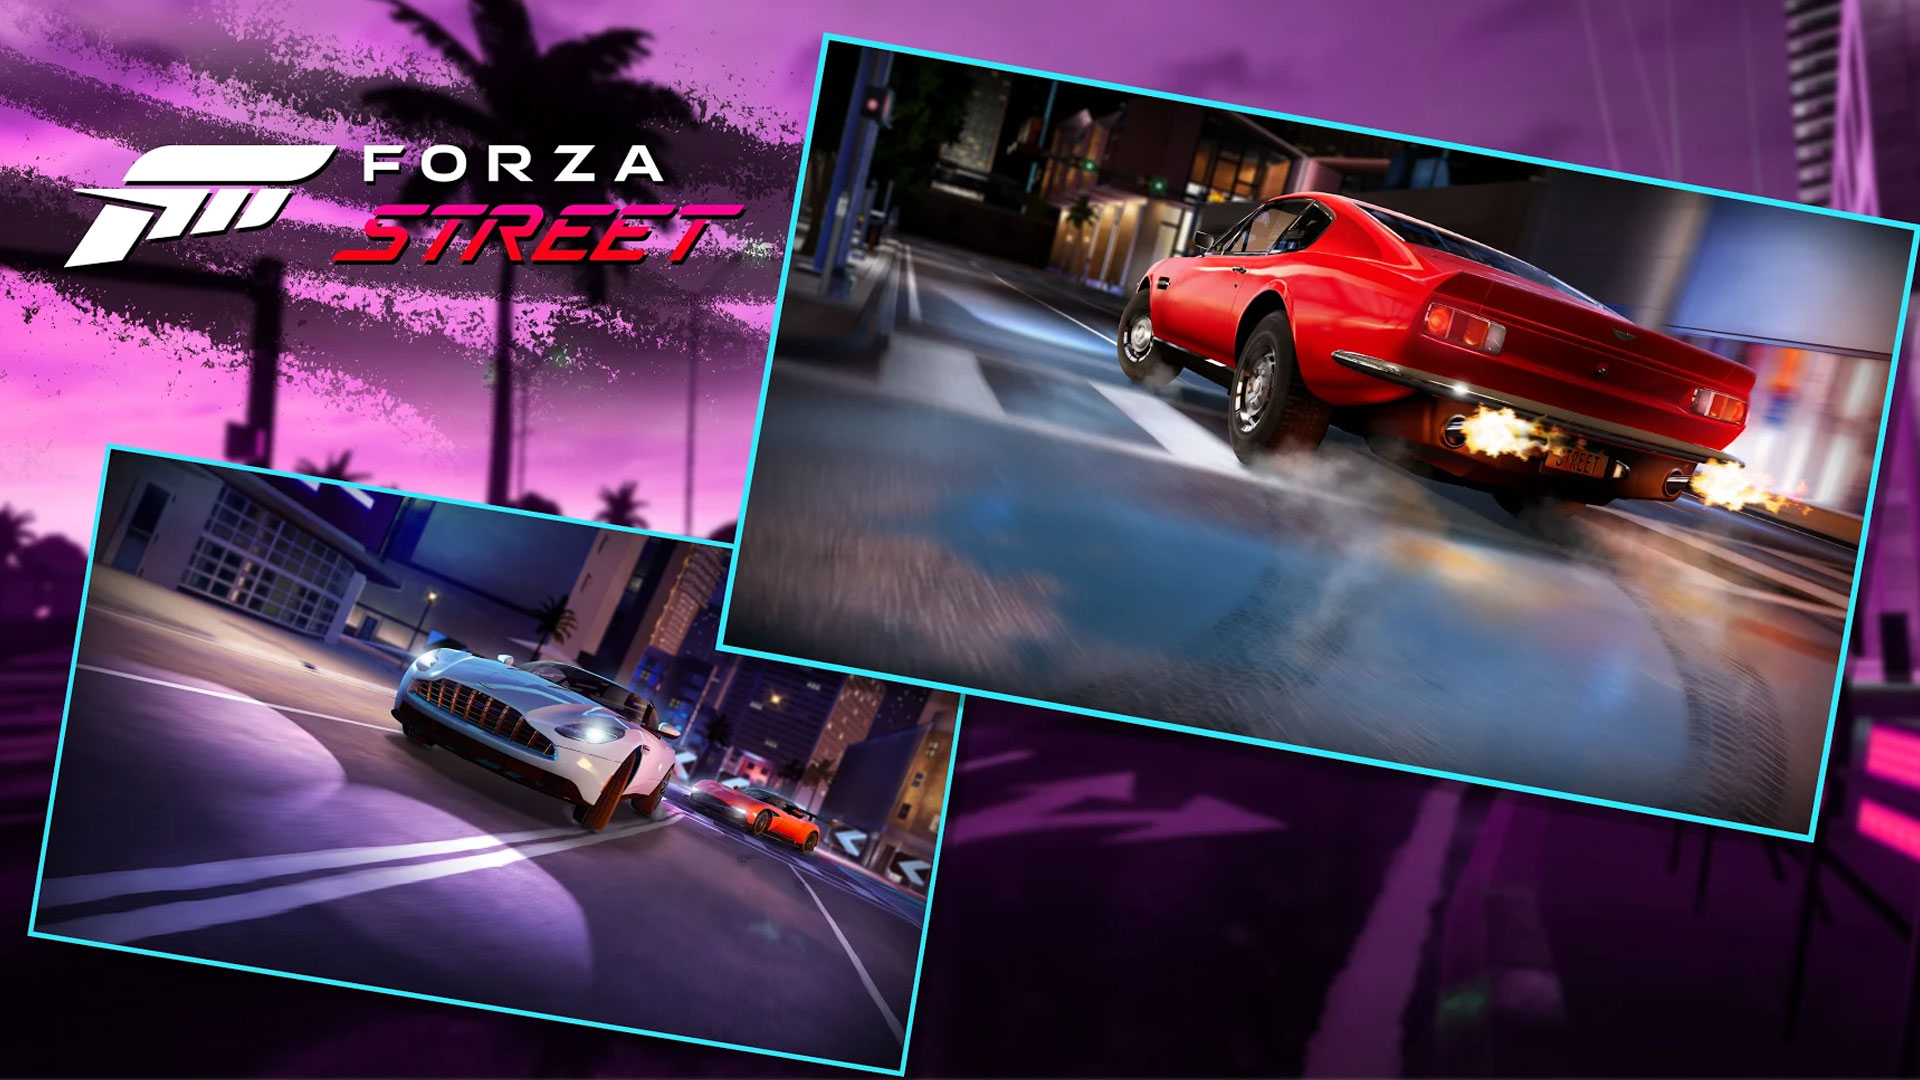 One-on-one competitions on Forza Street